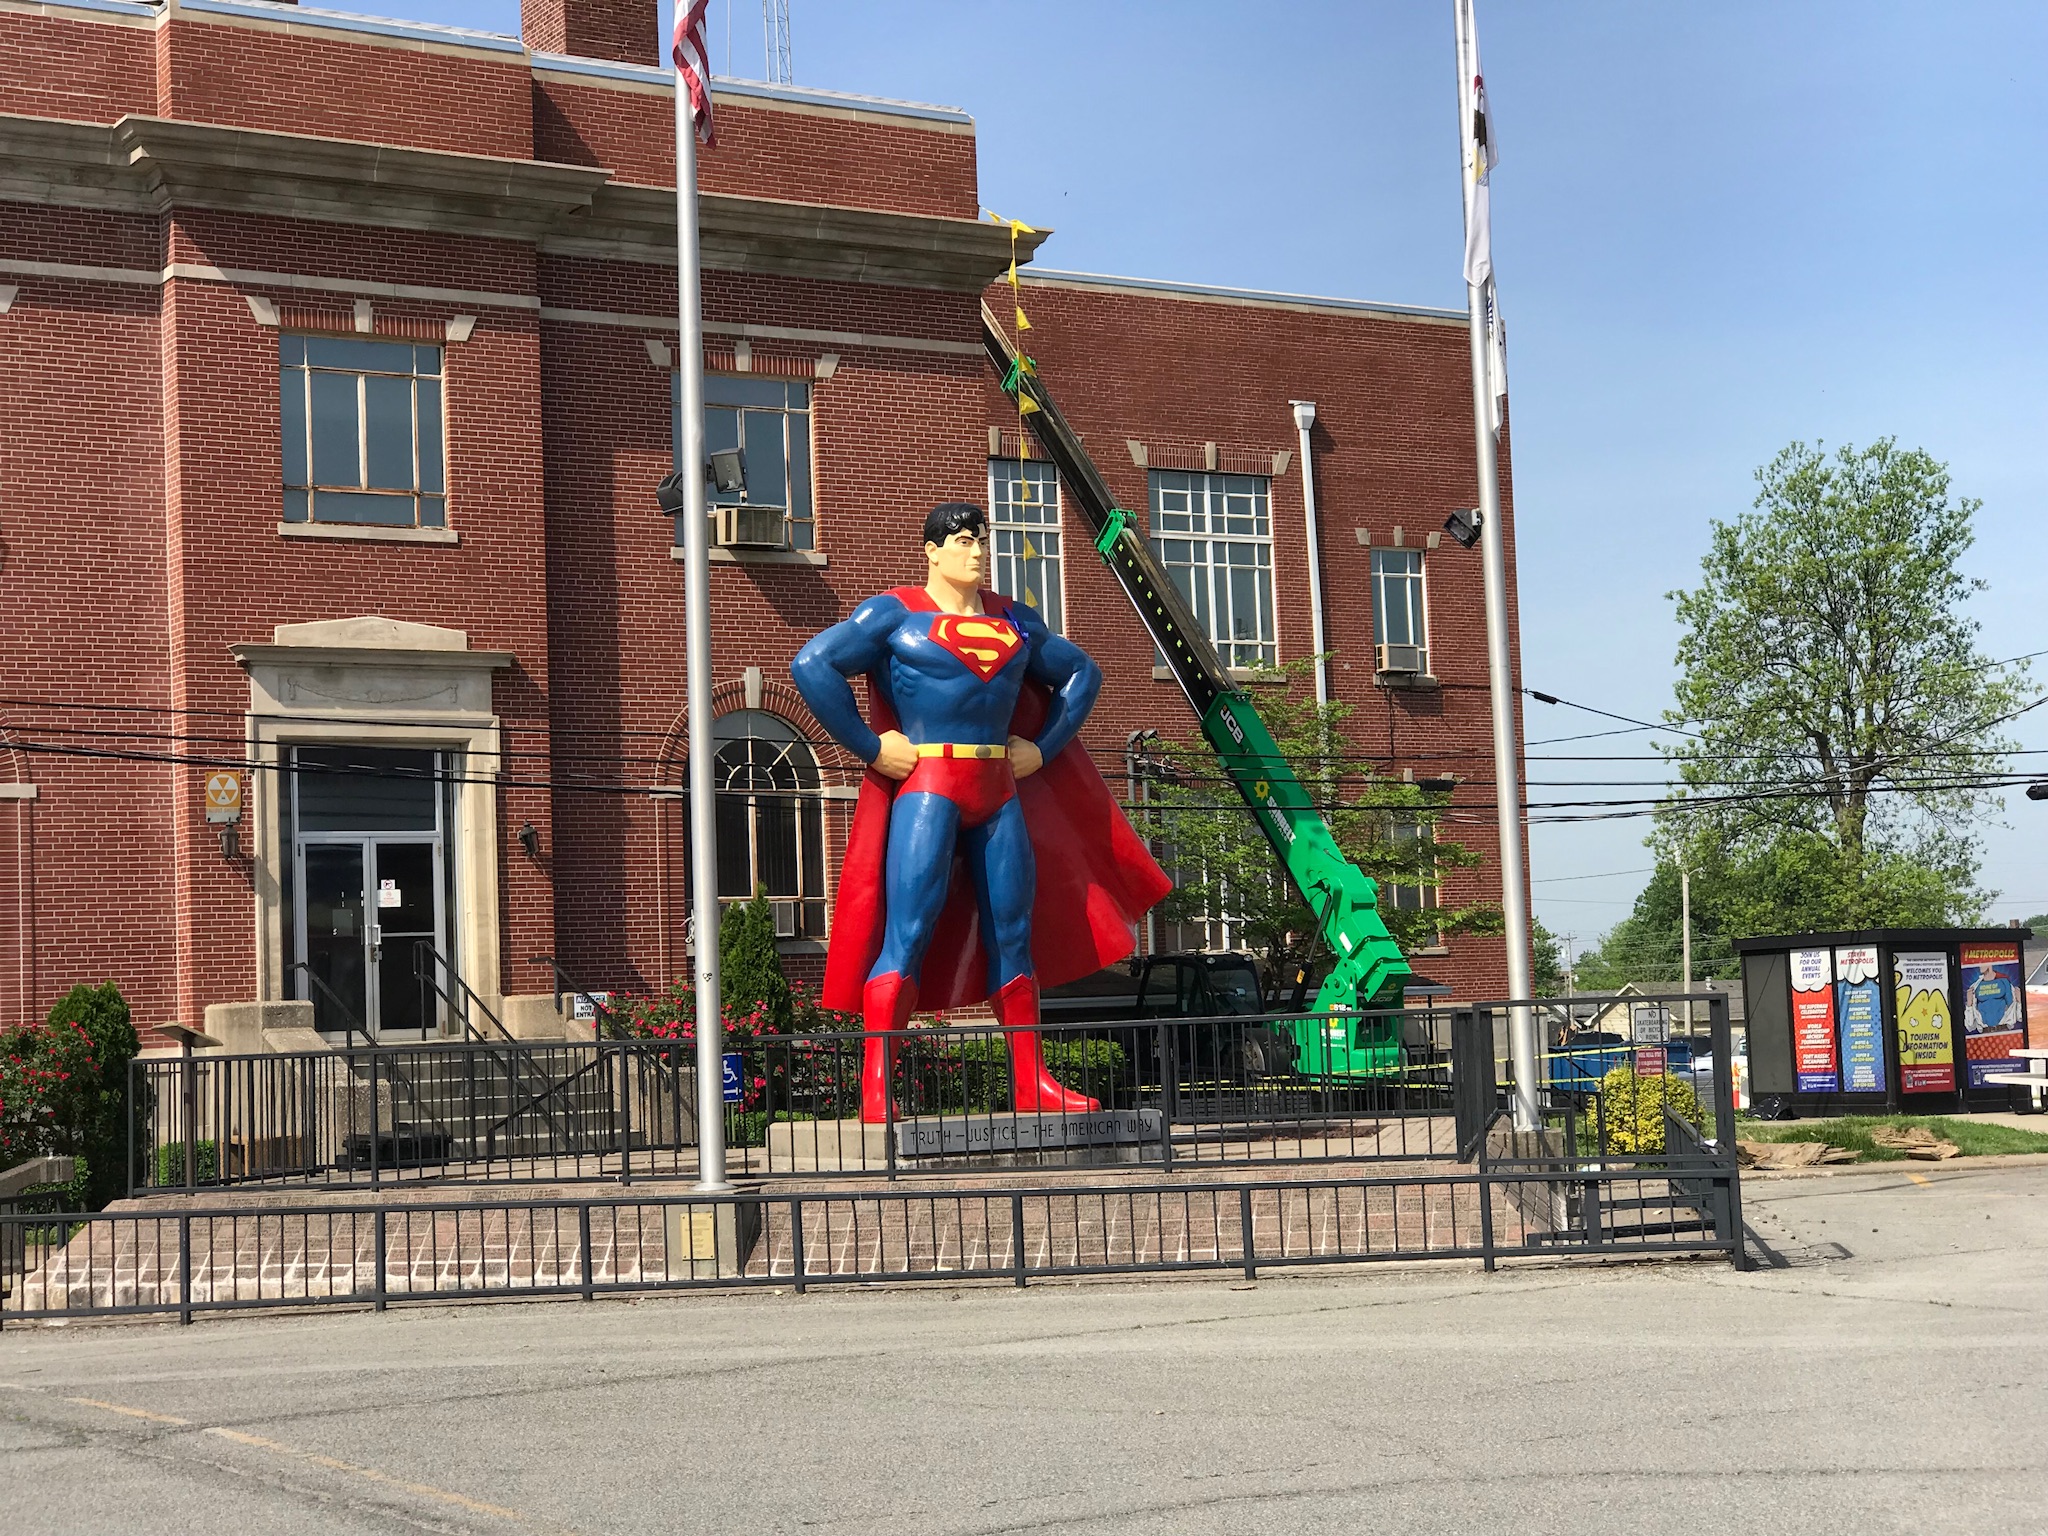 The Superman statue on the town square in Metropolis, Illinois.  Photo taken by and the property of FourWalls.